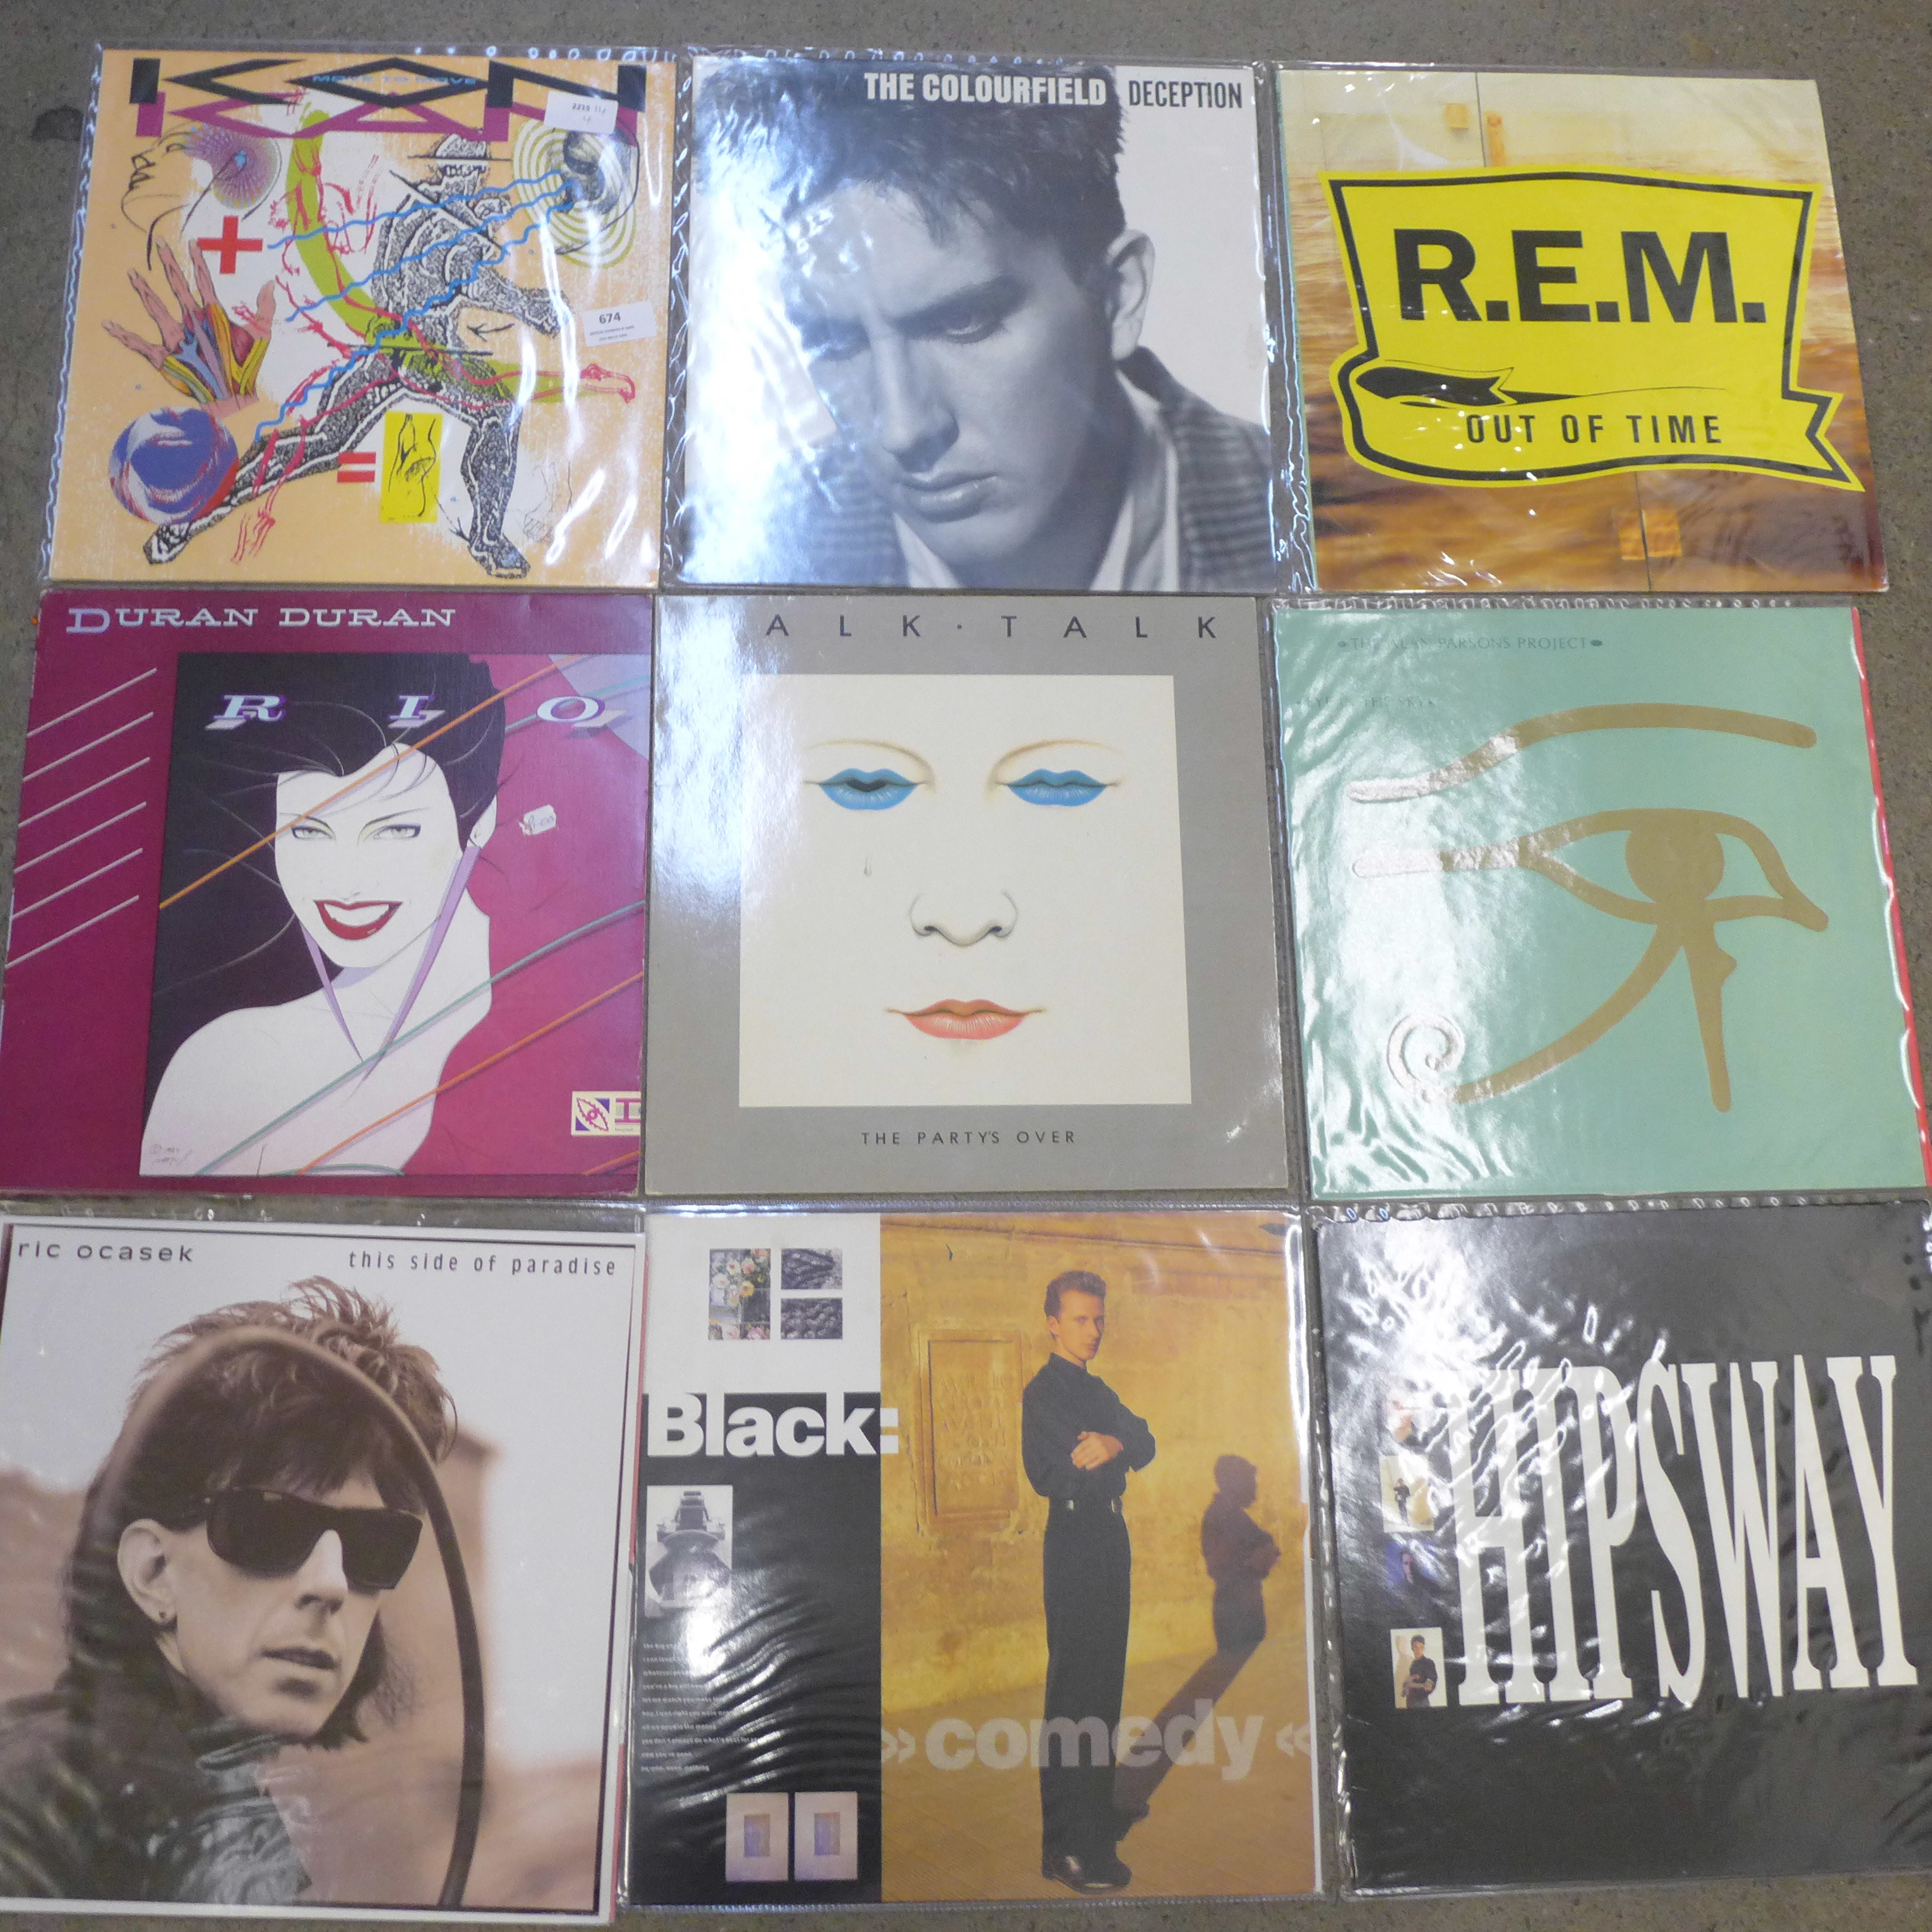 A collection of ten 1980s LP records